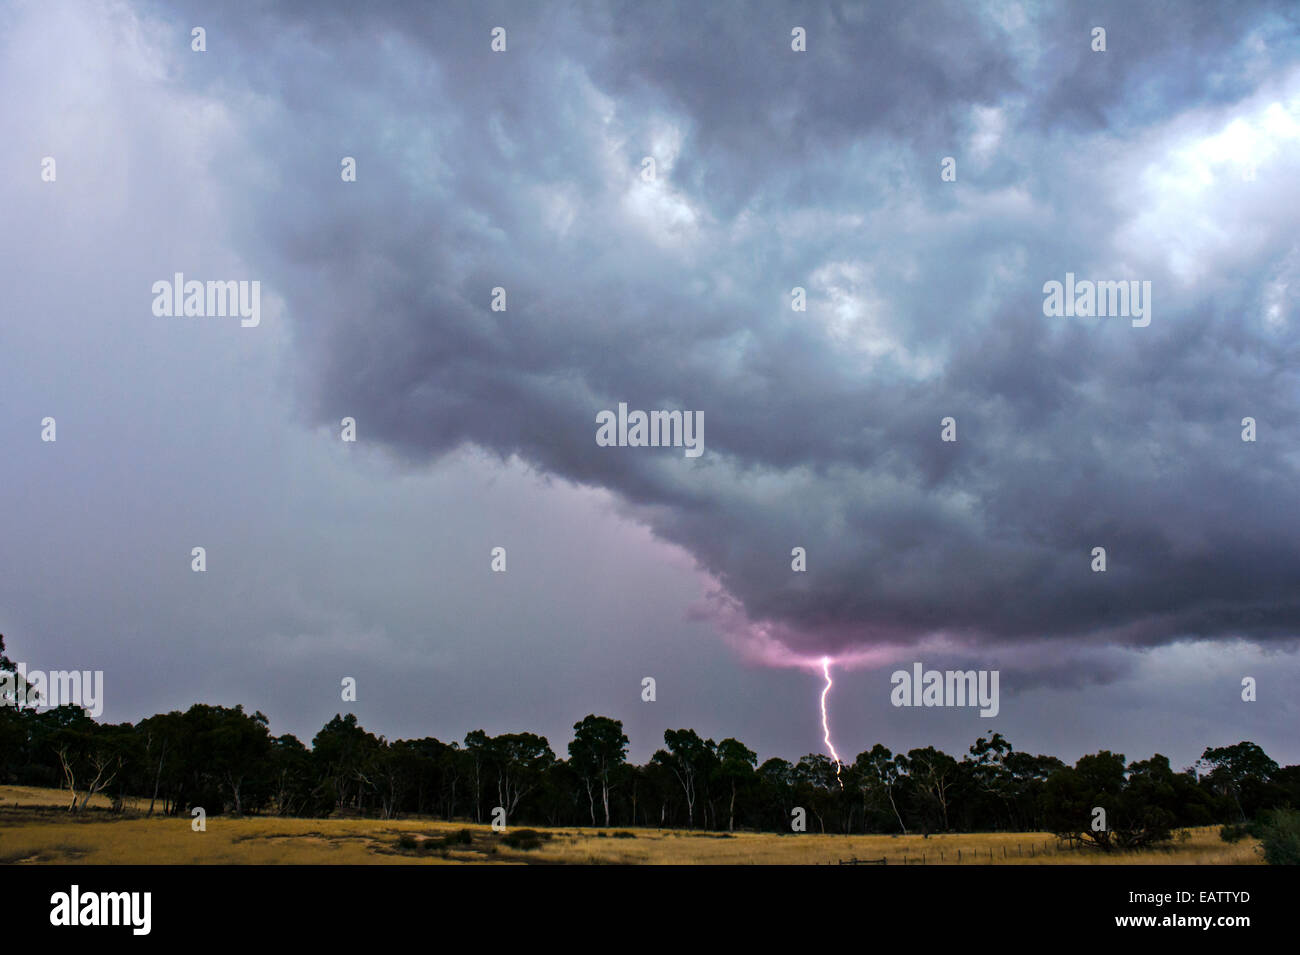 During thunder storms lightning can start fires in eucalyptus forests. Stock Photo